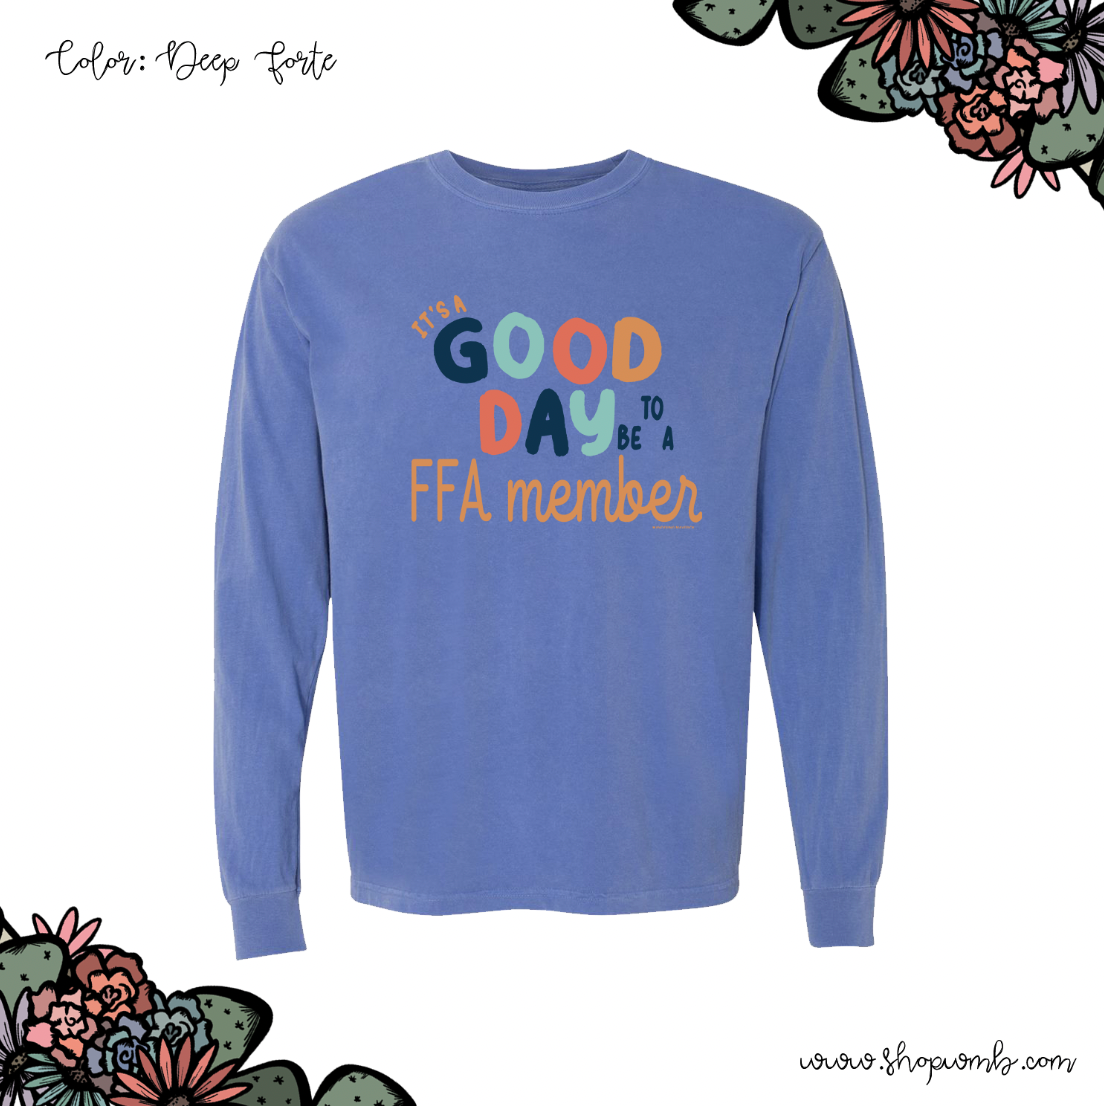 It's A Good Day To Be A FFA Member LONG SLEEVE T-Shirt (S-3XL) - Multiple Colors!